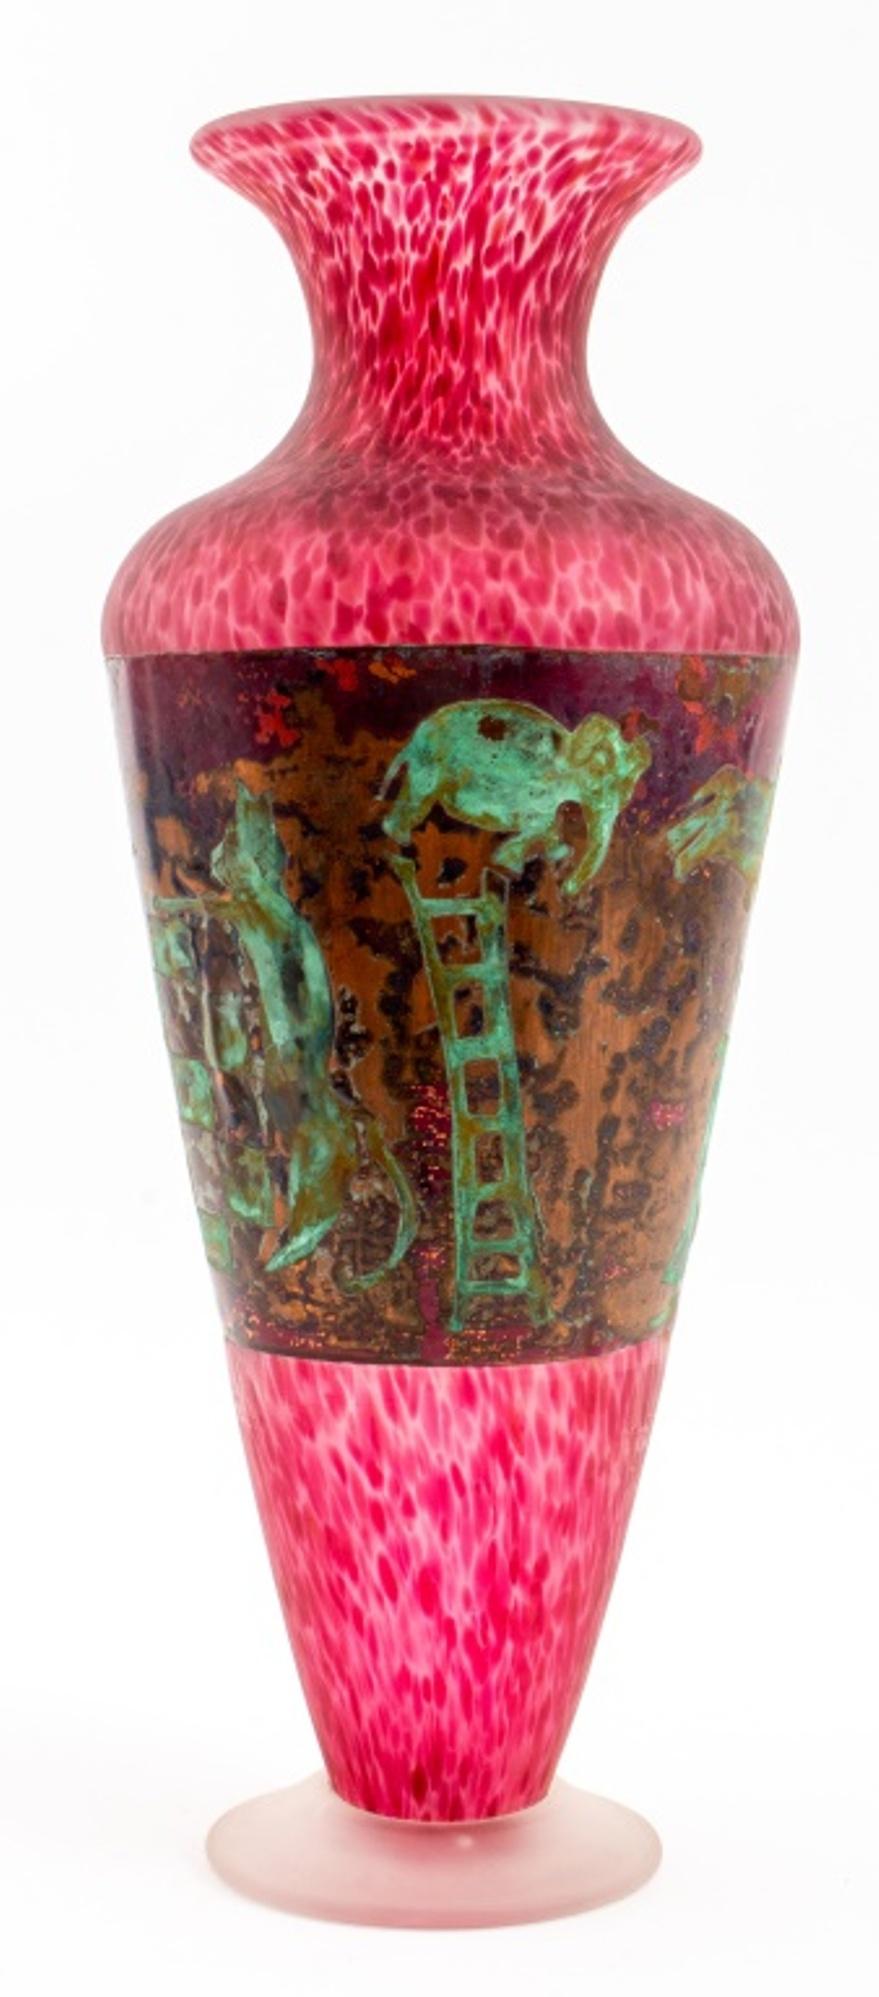 Modern studio art glass vase in mottled red frosted glass mounted with a verdigris copper panel depicting a Surrealist scene with animals, figures, and a checkerboard motif, raised on a round colorless frosted foot, signed 